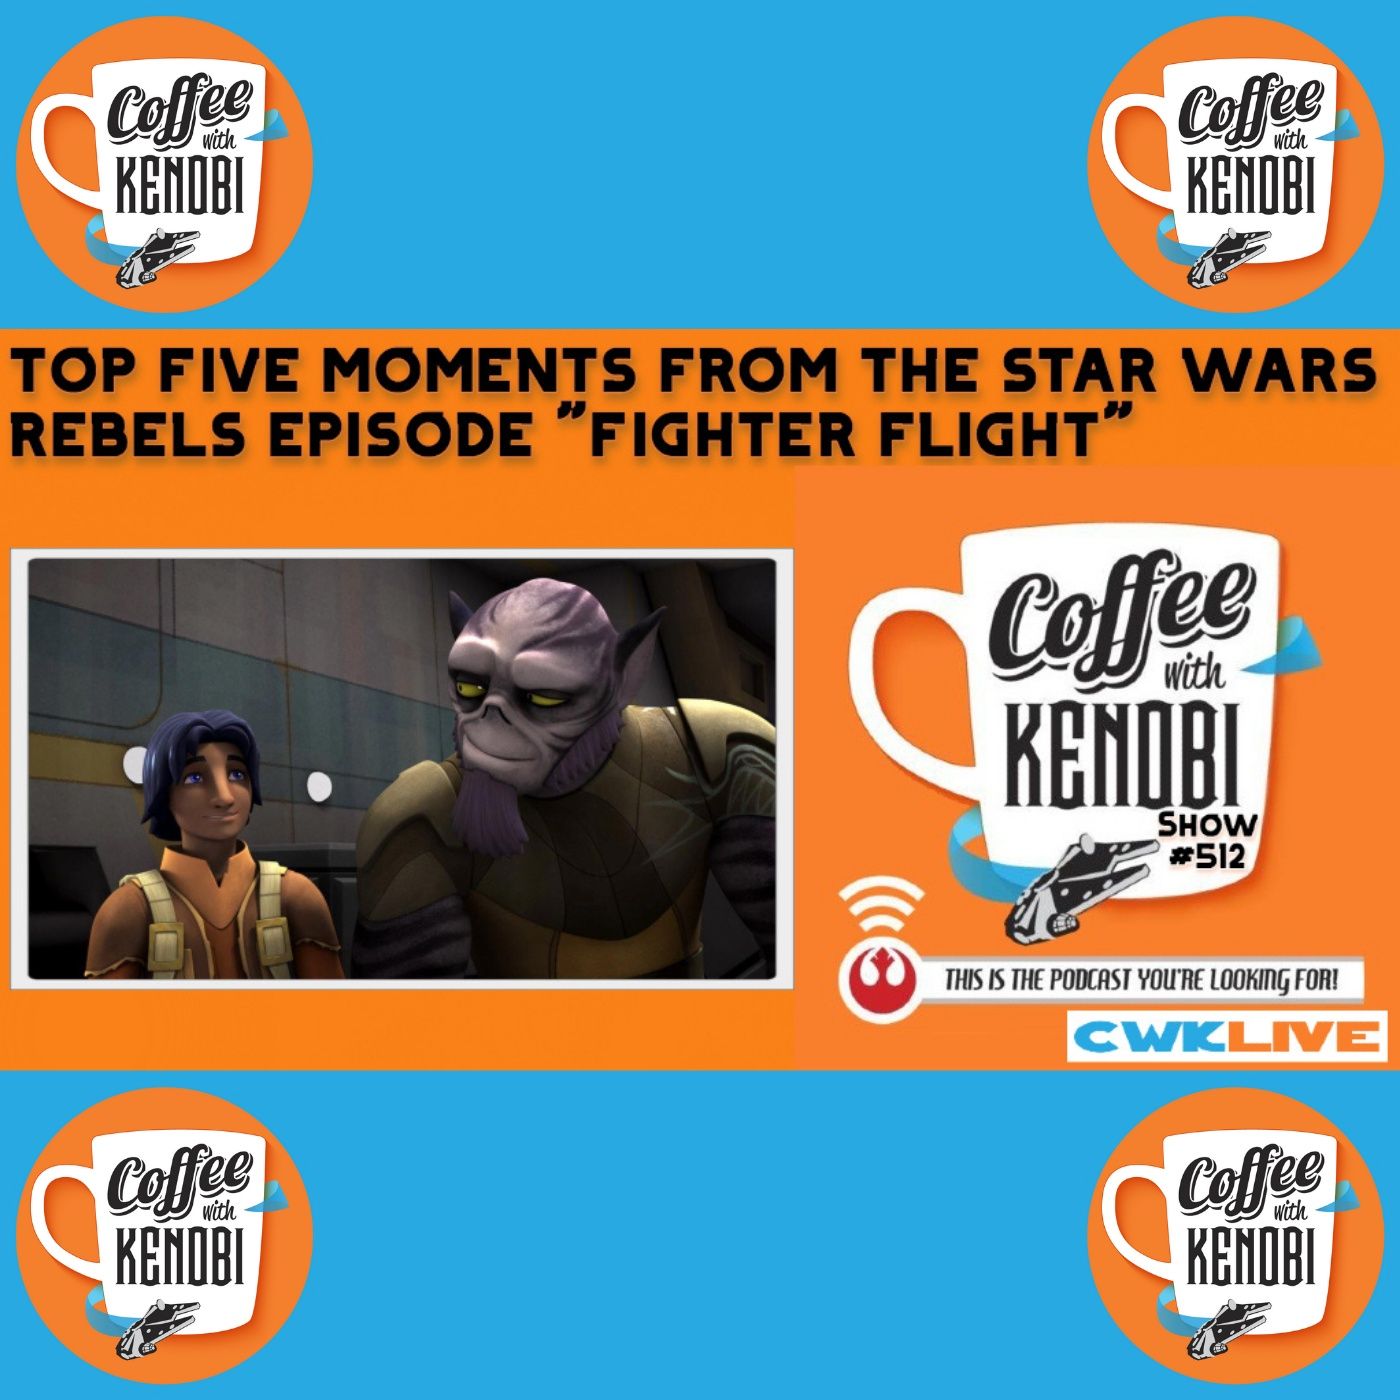 CWK Show #512 LIVE: Top Five Moments From Star Wars Rebels 